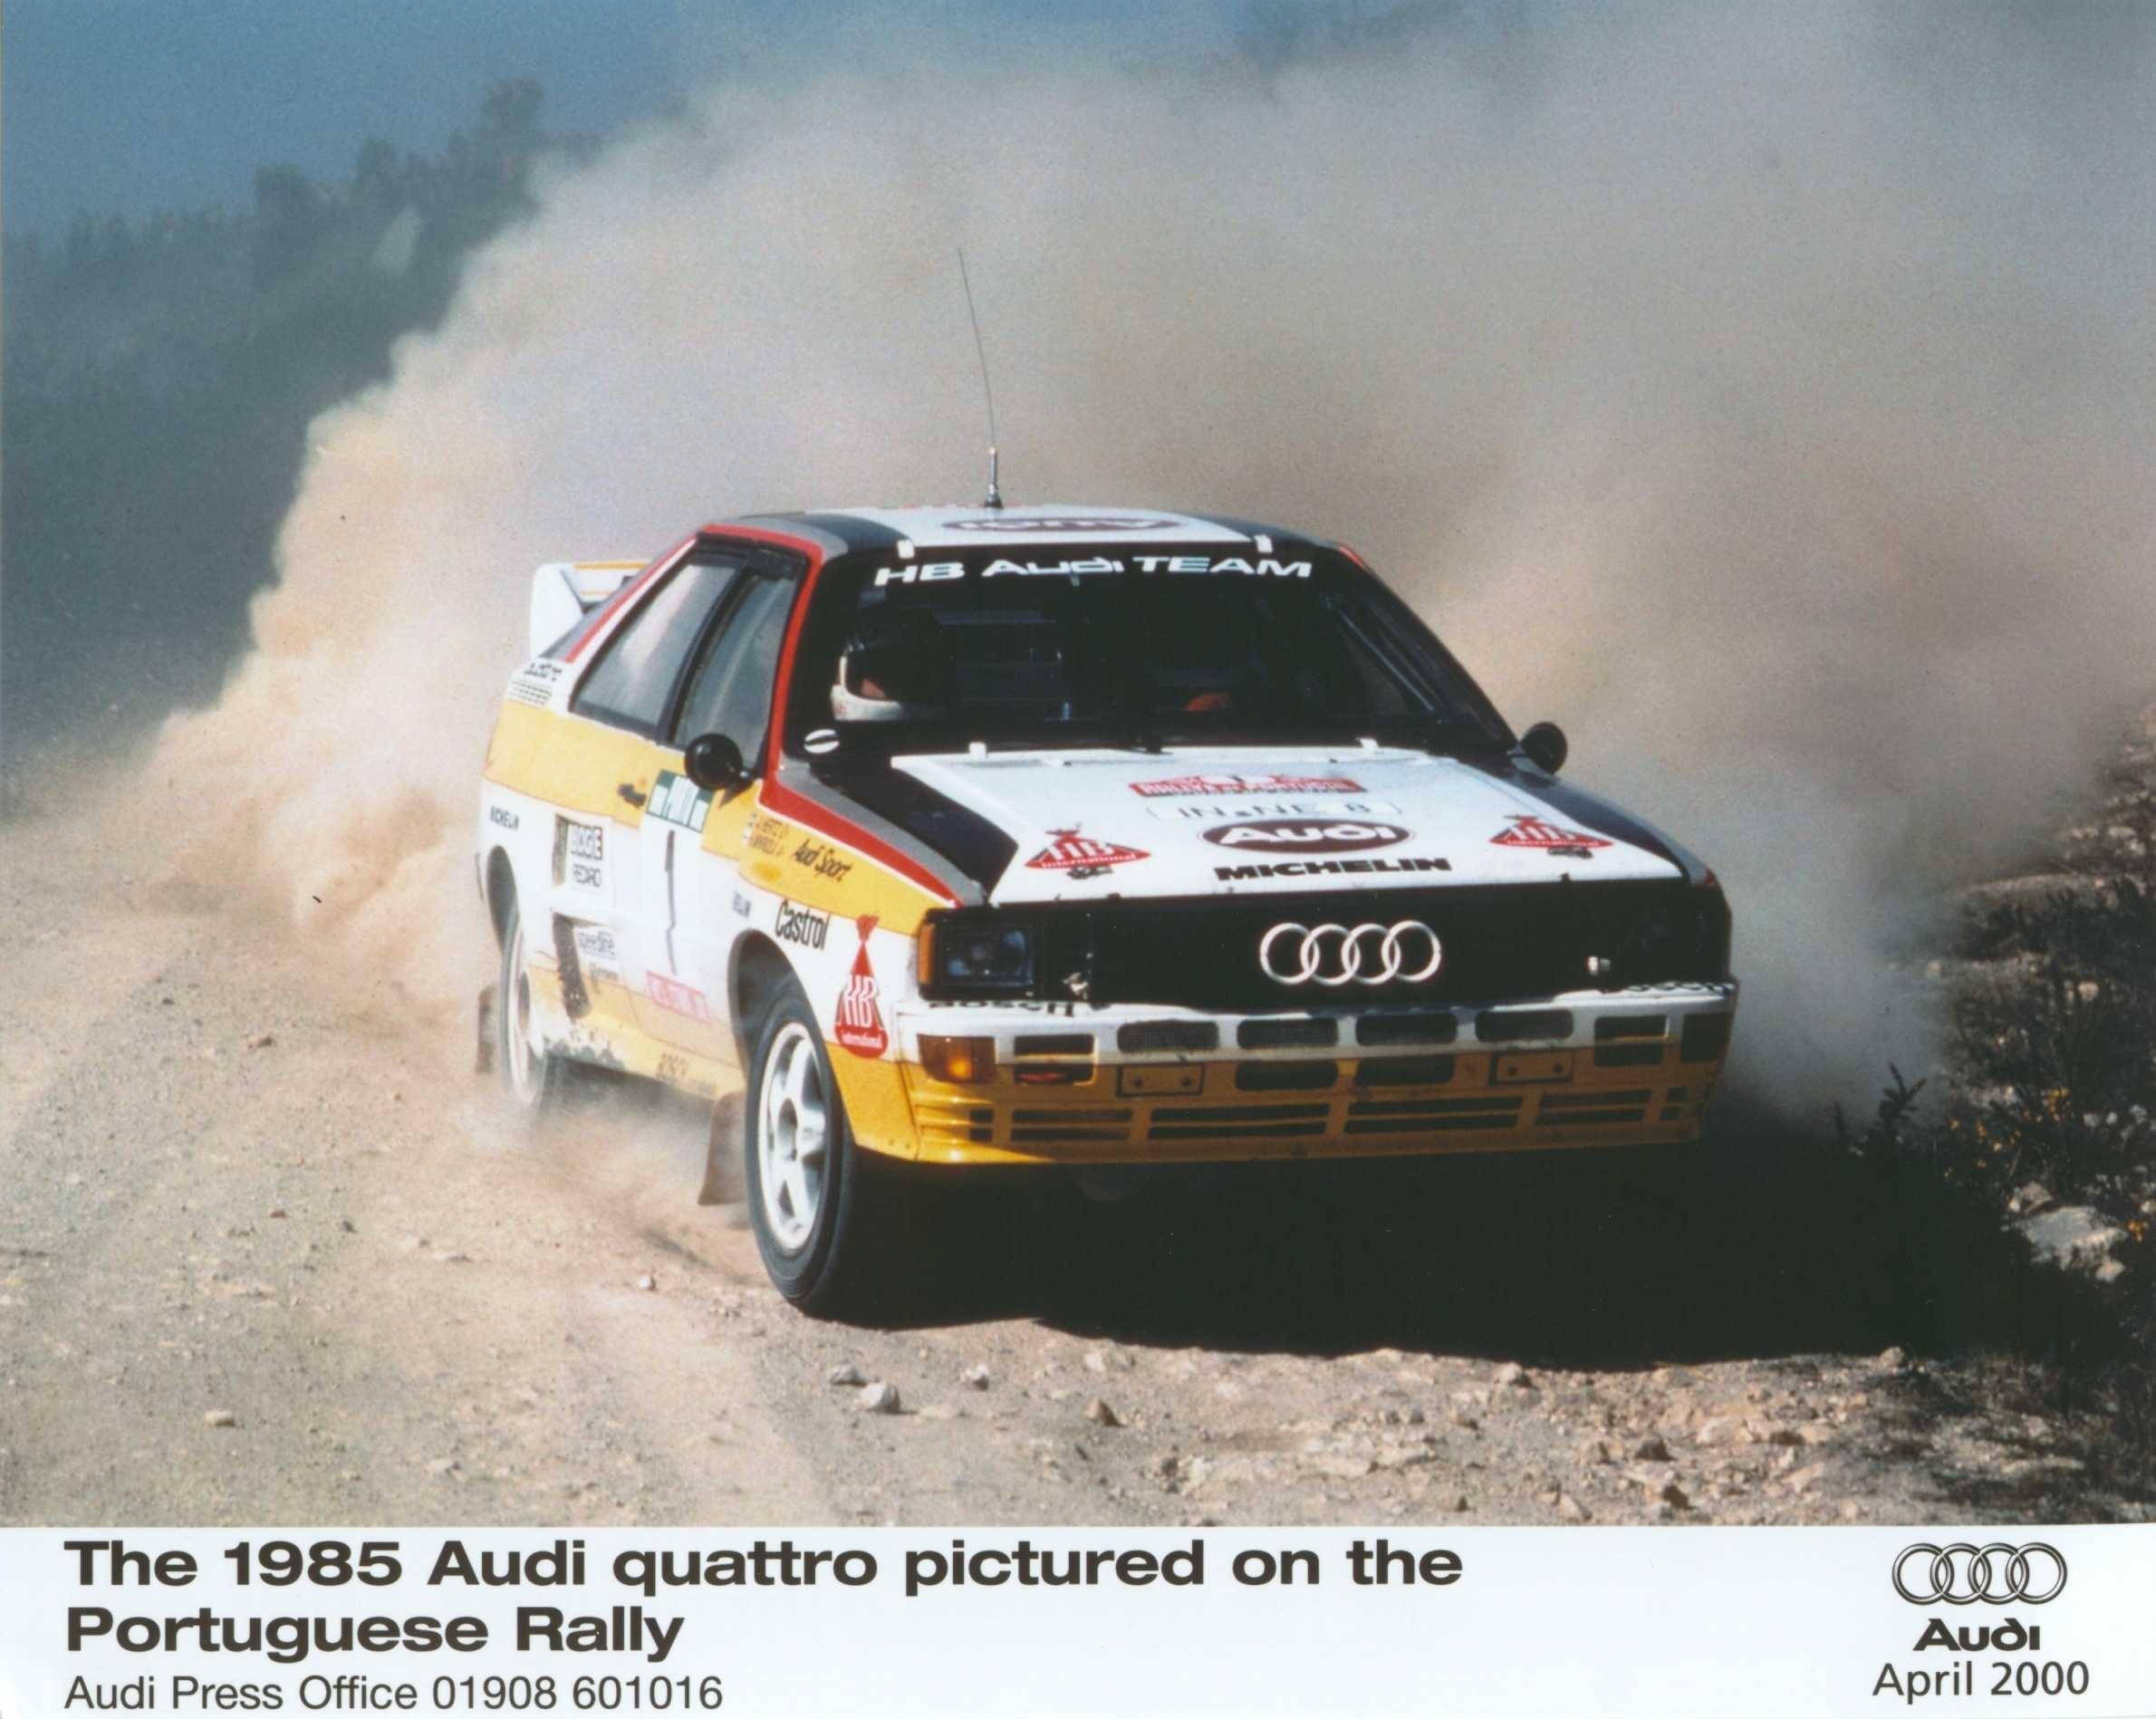 Download 2380x1898 Cars audi dust portugal vehicles racing